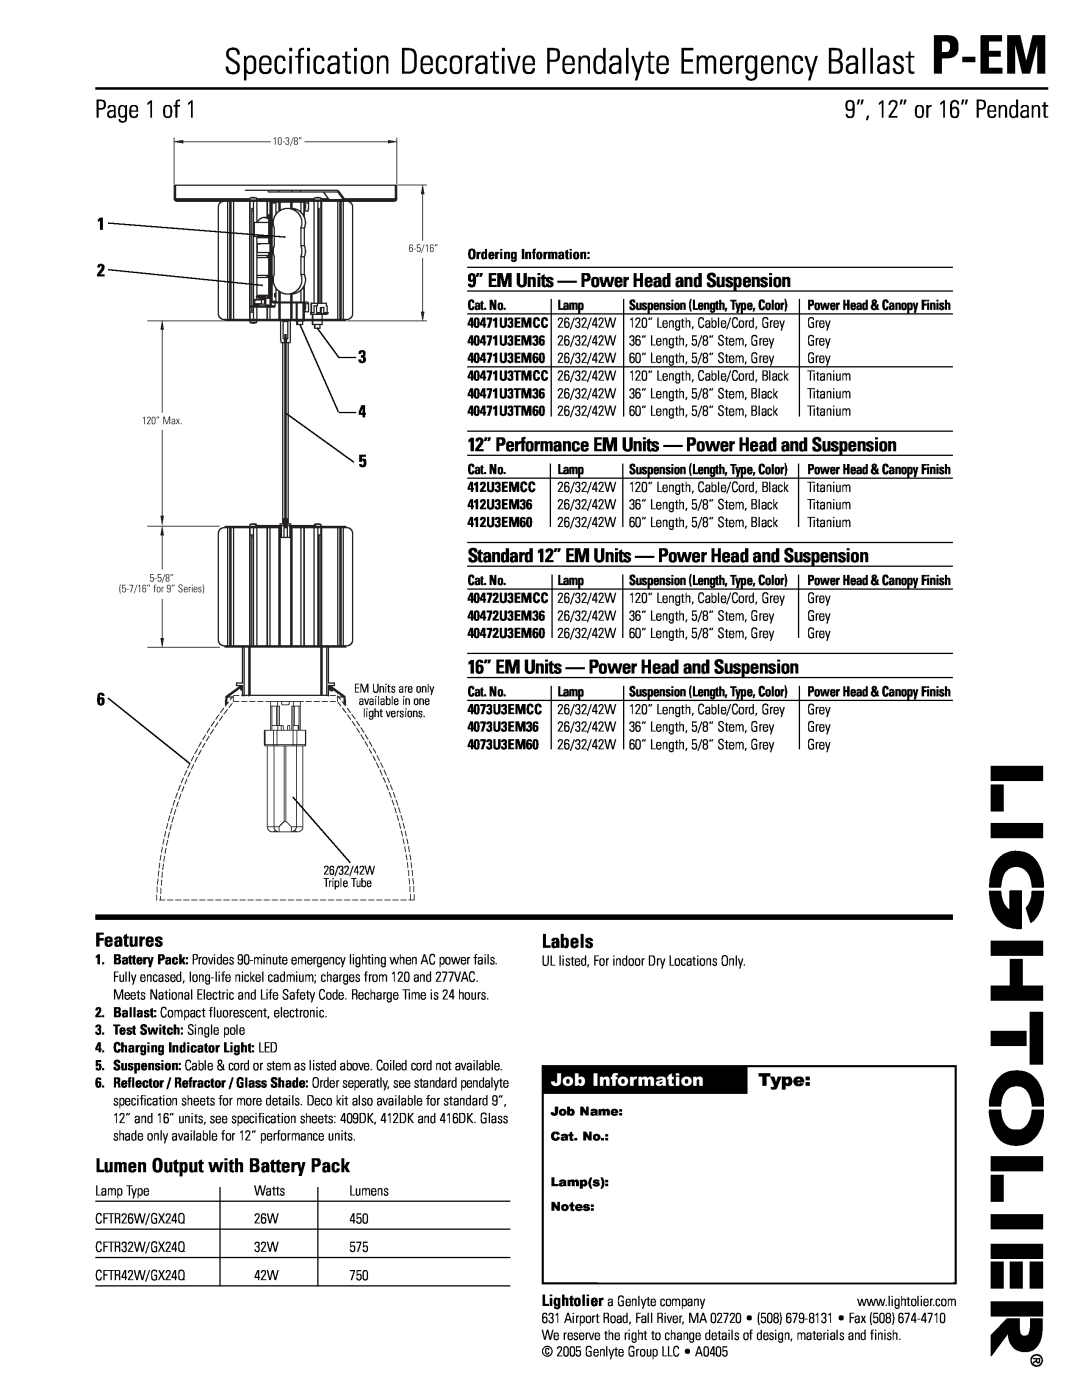 Lightolier P-EM specifications Page 1 of, 9”, 12” or 16” Pendant, 9” EM Units - Power Head and Suspension, Features, Type 